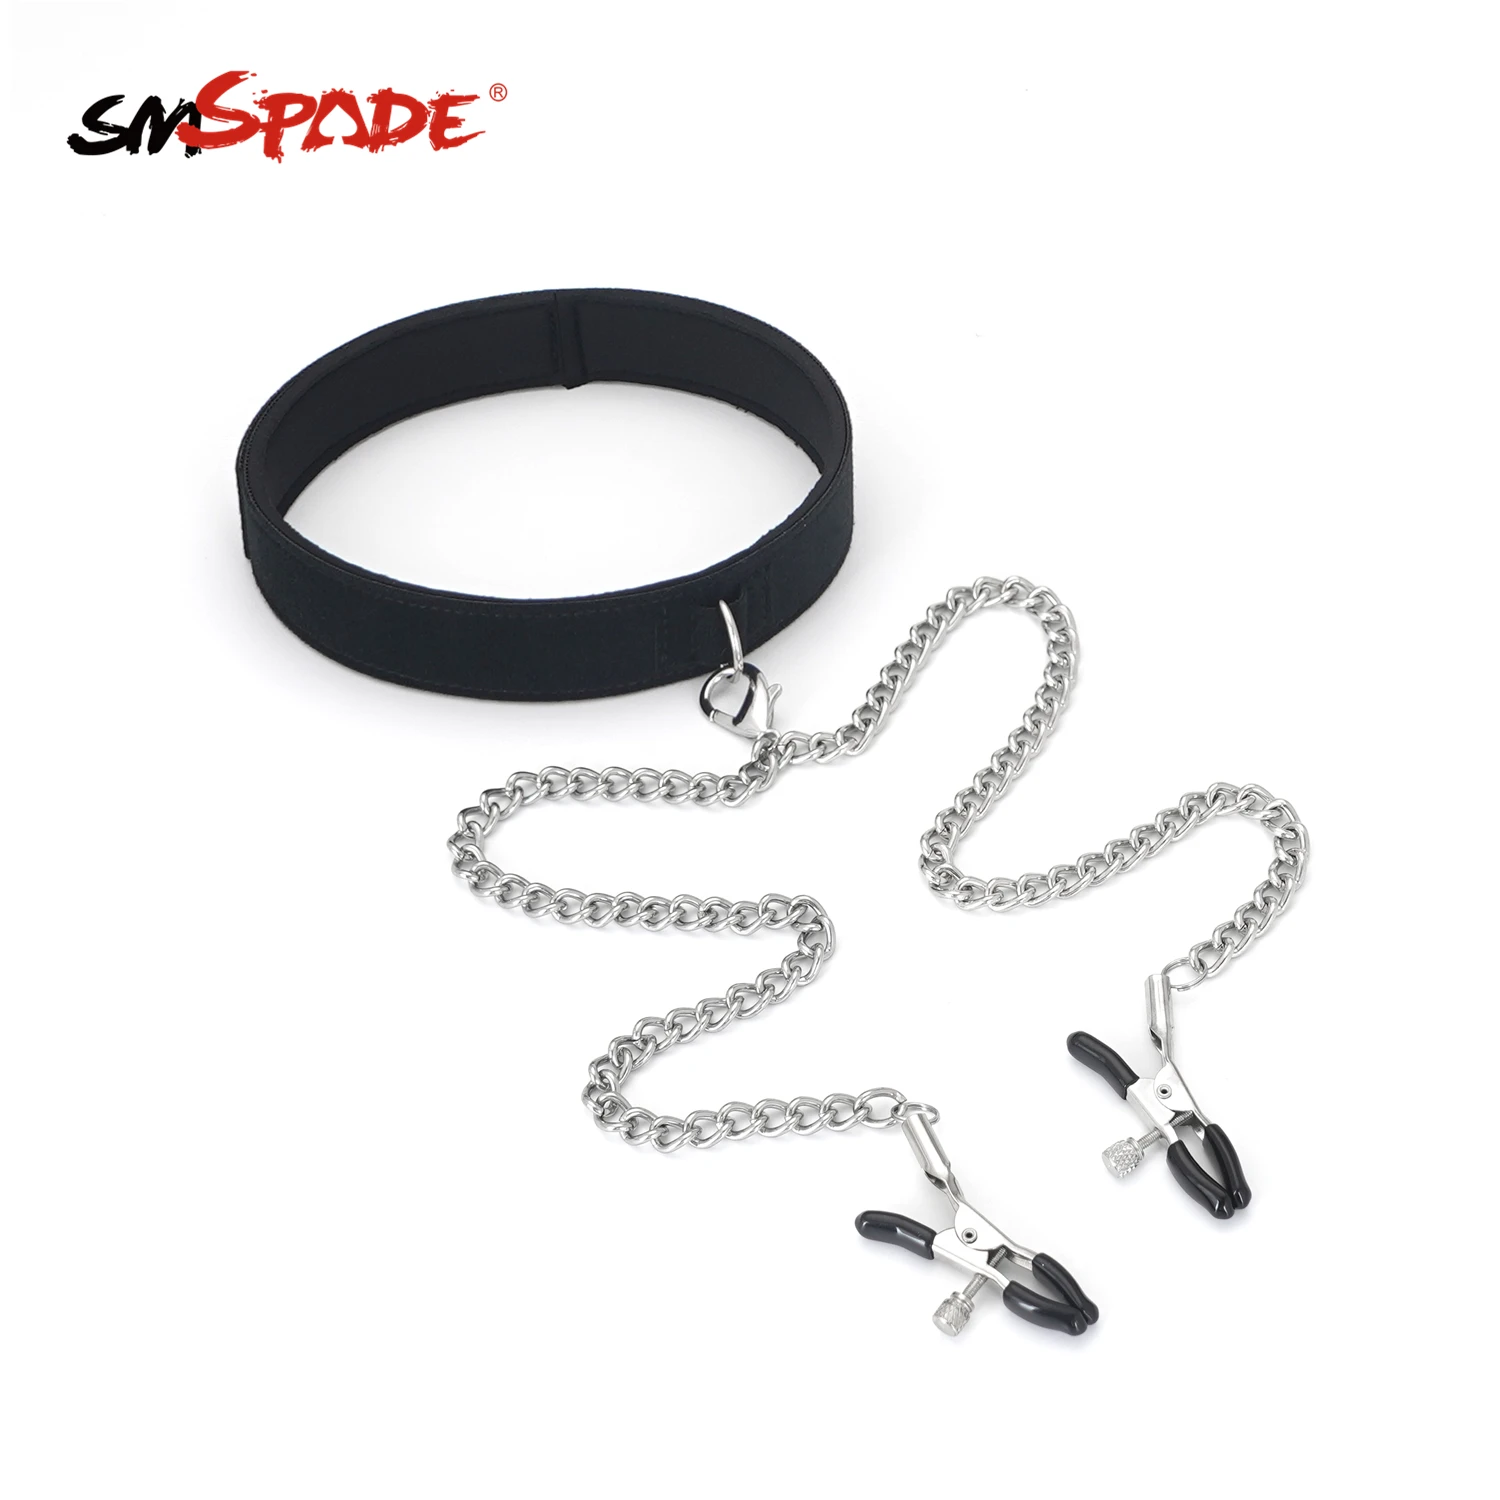 

BDSM Bondage Restraint Fetish Slave Collar with Nipple Clamps Adult Erotic Sex Toys For Woman Couples Games Sex Products